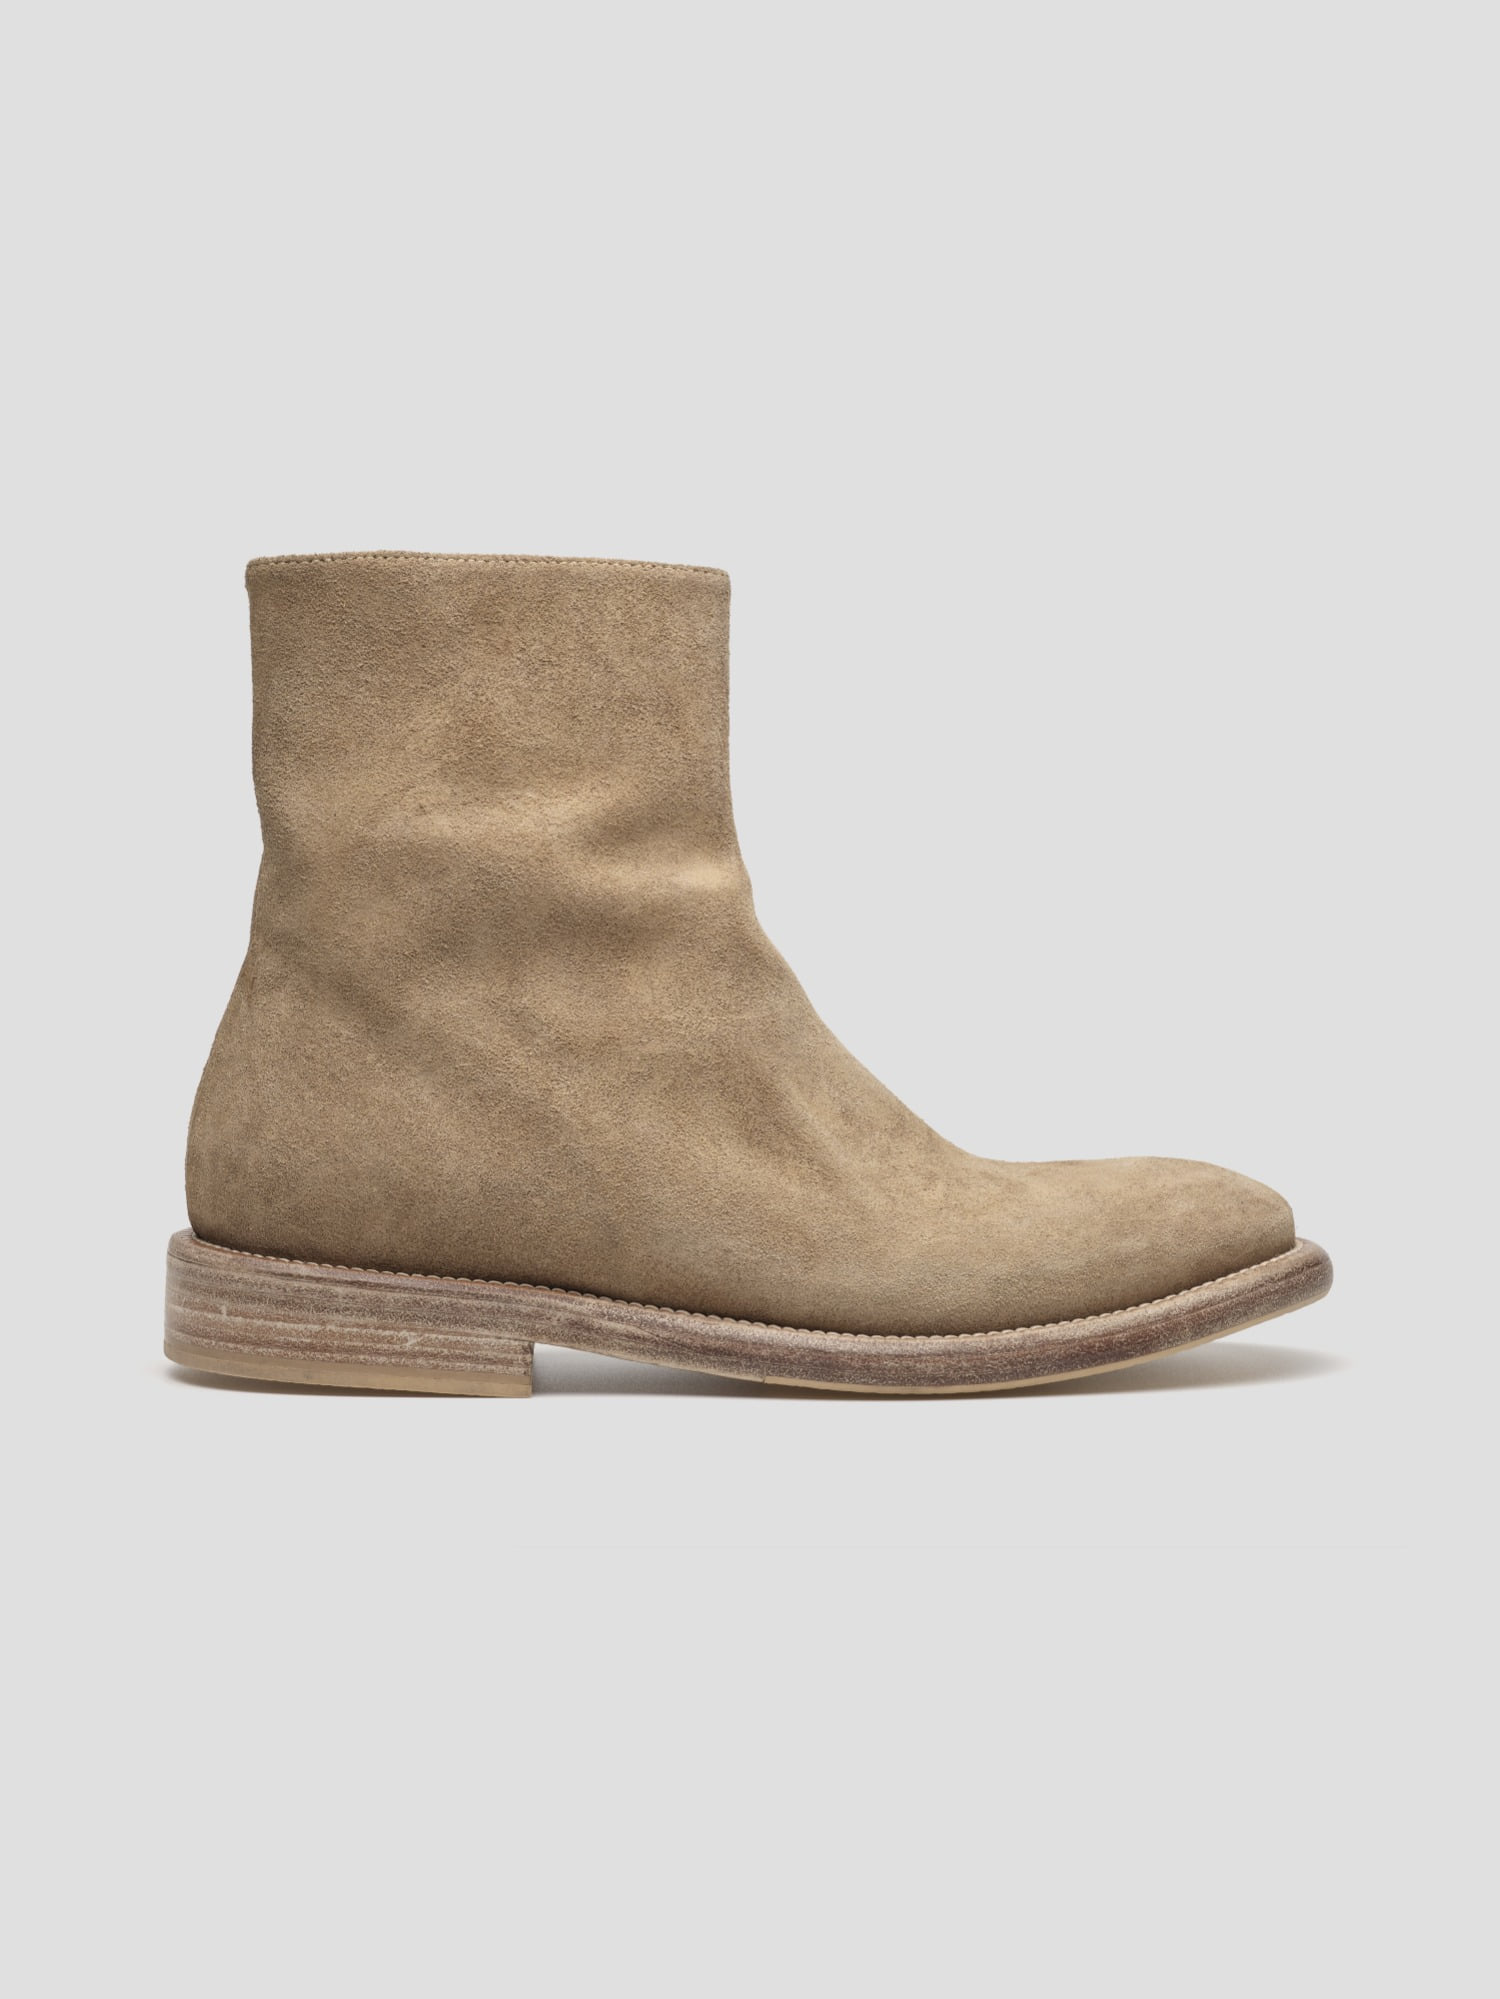 boots 01 suede sand (only for men) 스니커즈와 구두